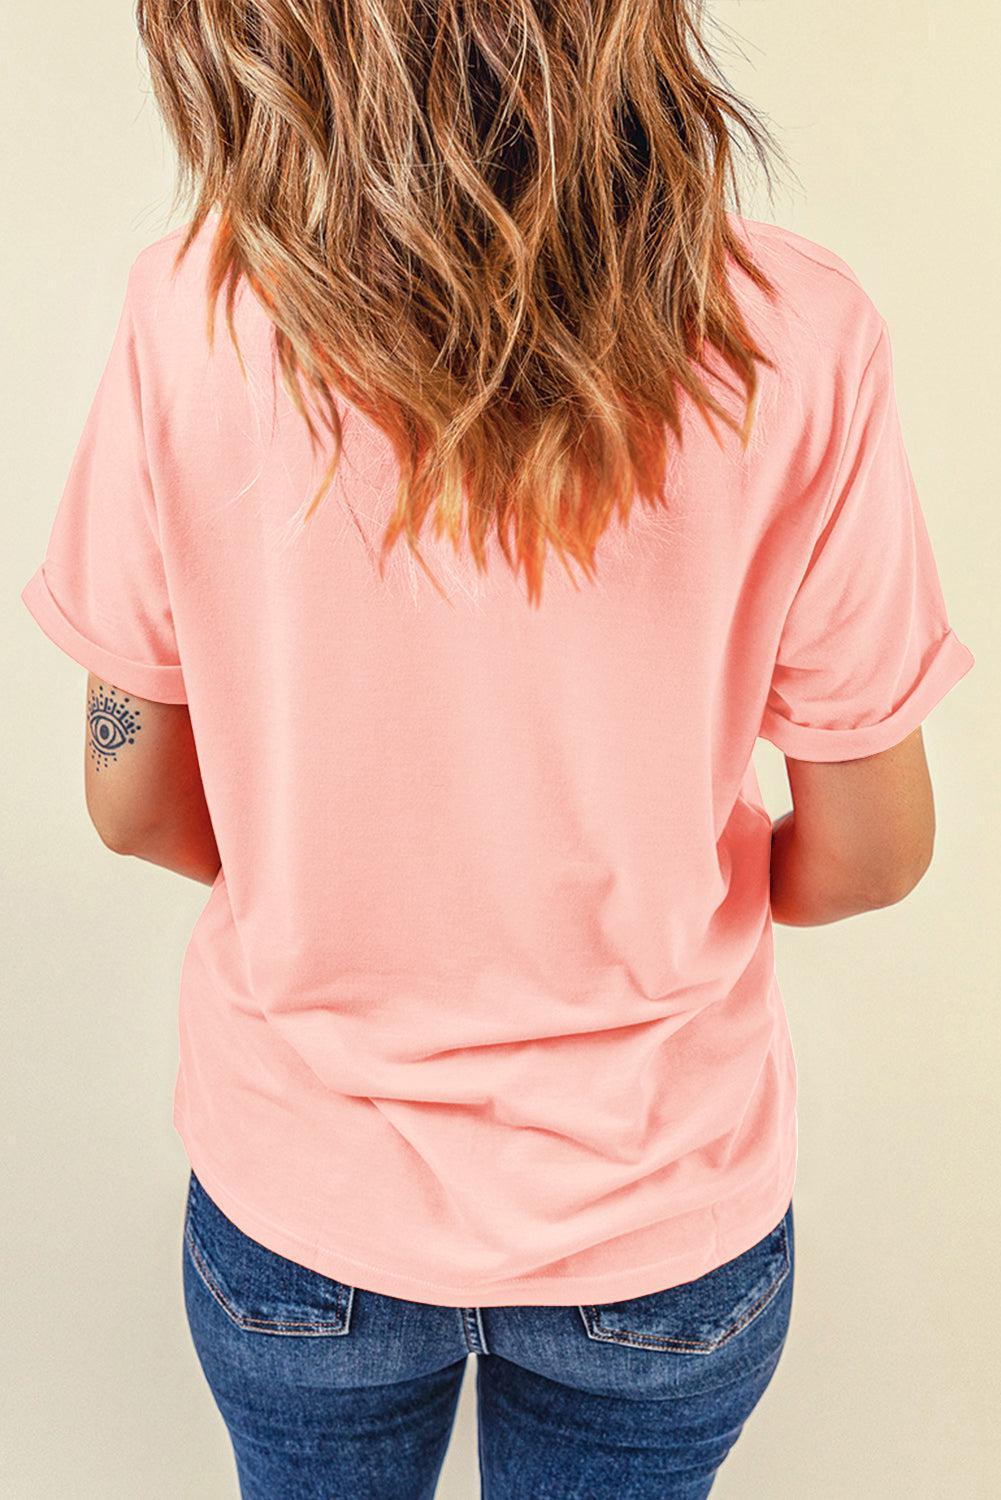 a woman with long hair wearing a pink shirt